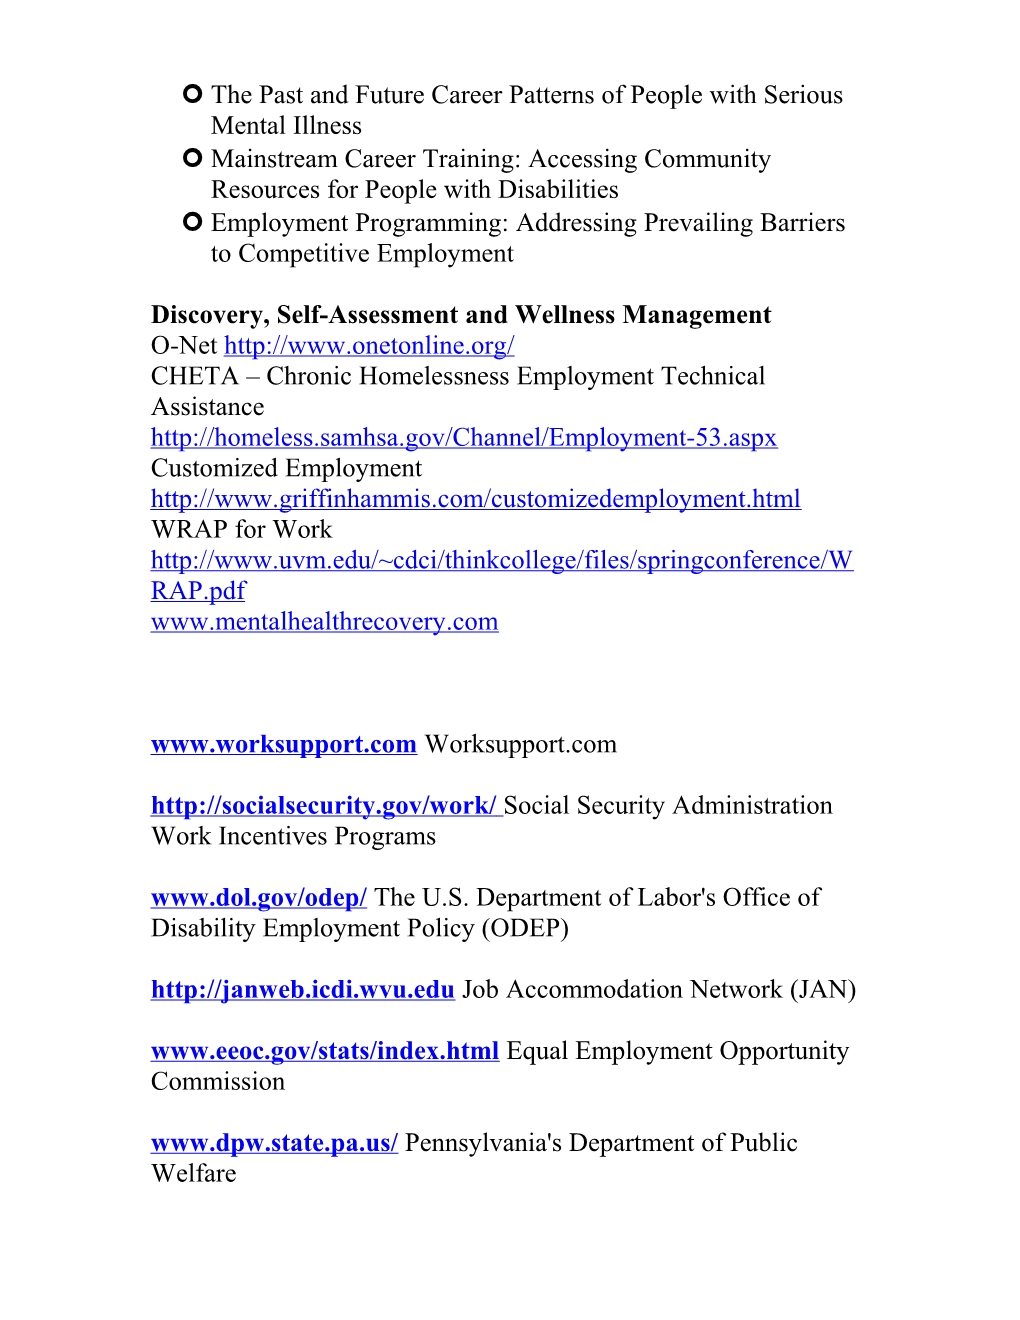 Resources for Supported Employment